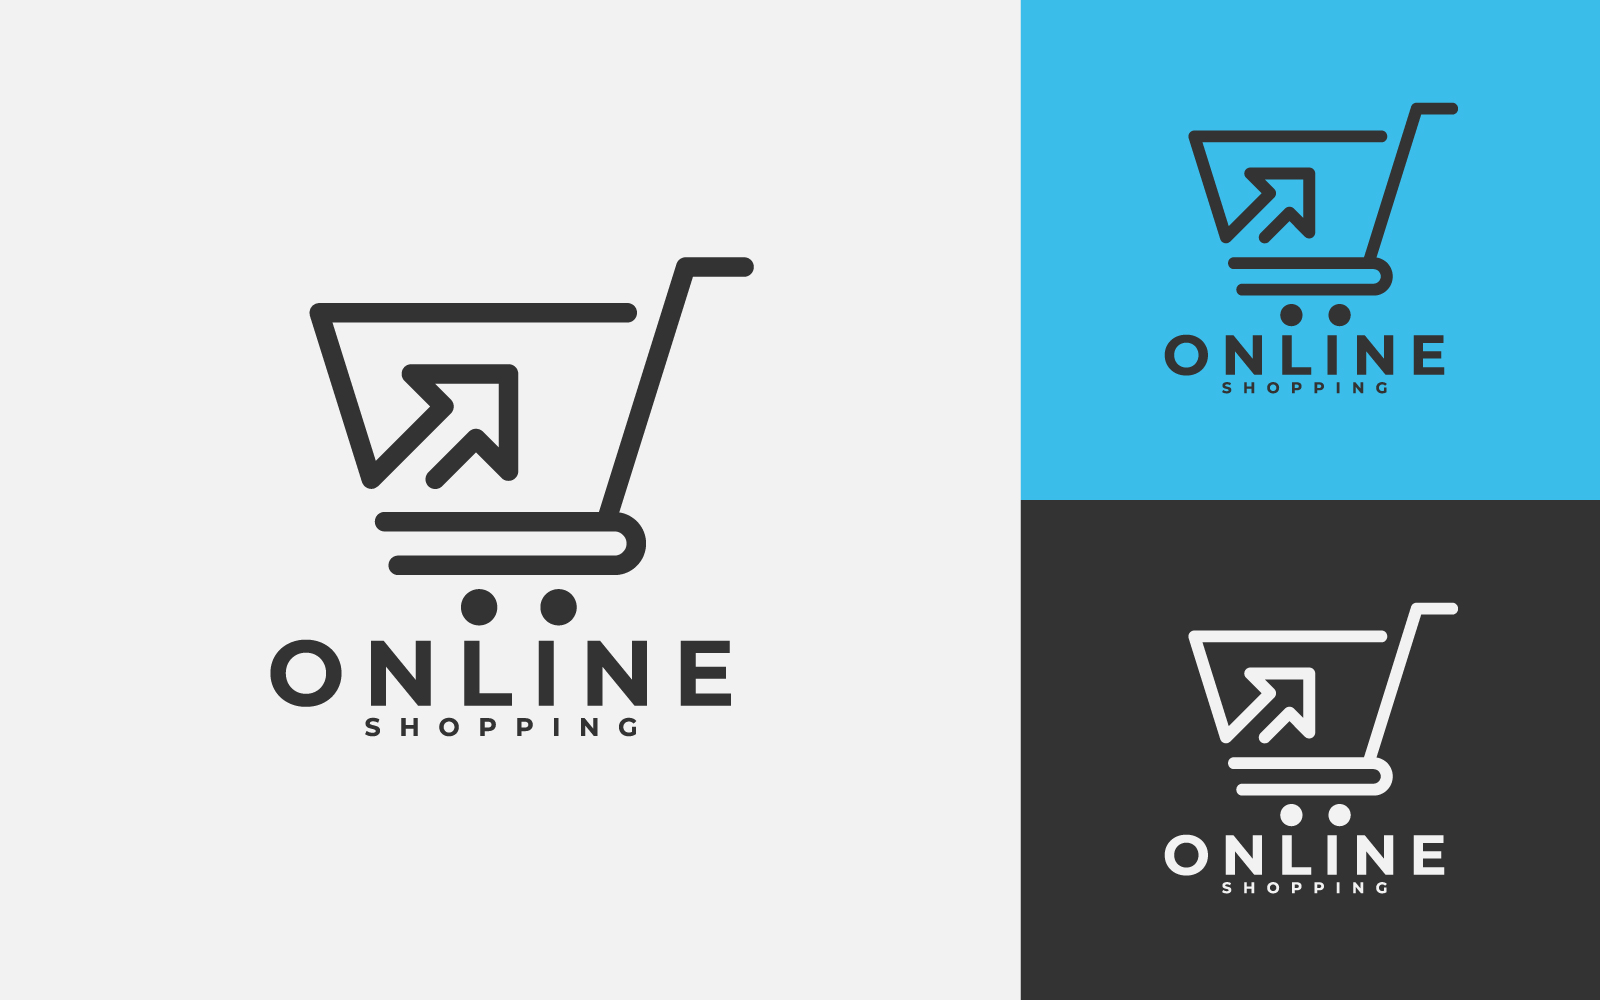 Online Shopping Logo Design Template With Shopping Cart For E-Commerce Web Or Business.